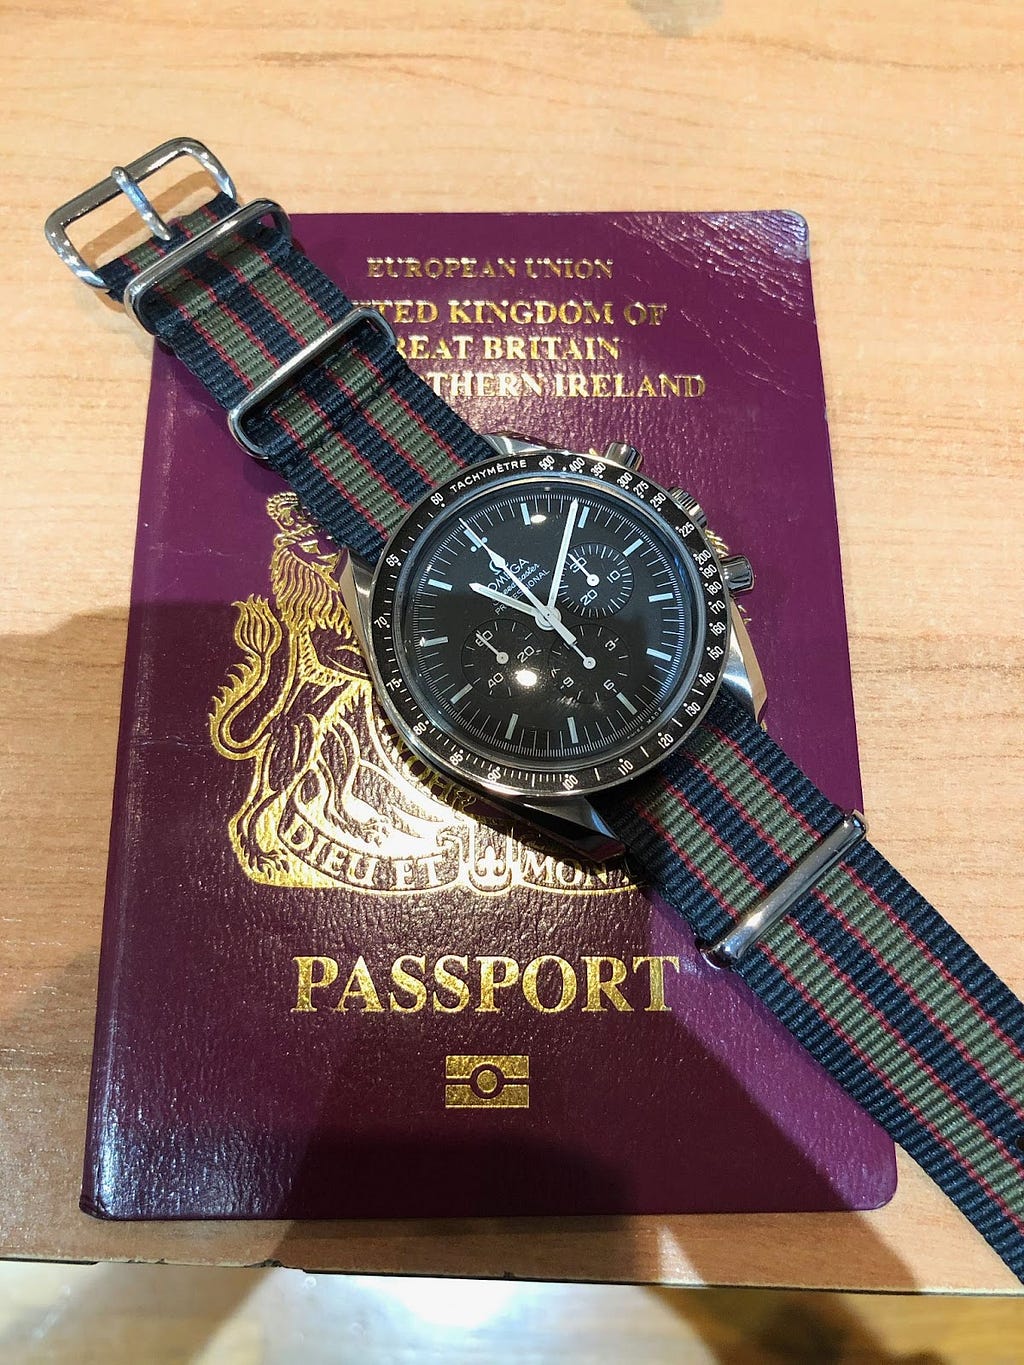 Older burgundy colour EU UK passport with an Omega Speedmaster Professional watch on a NATO strap cross it diagonally from top left. Strap back, red and green.